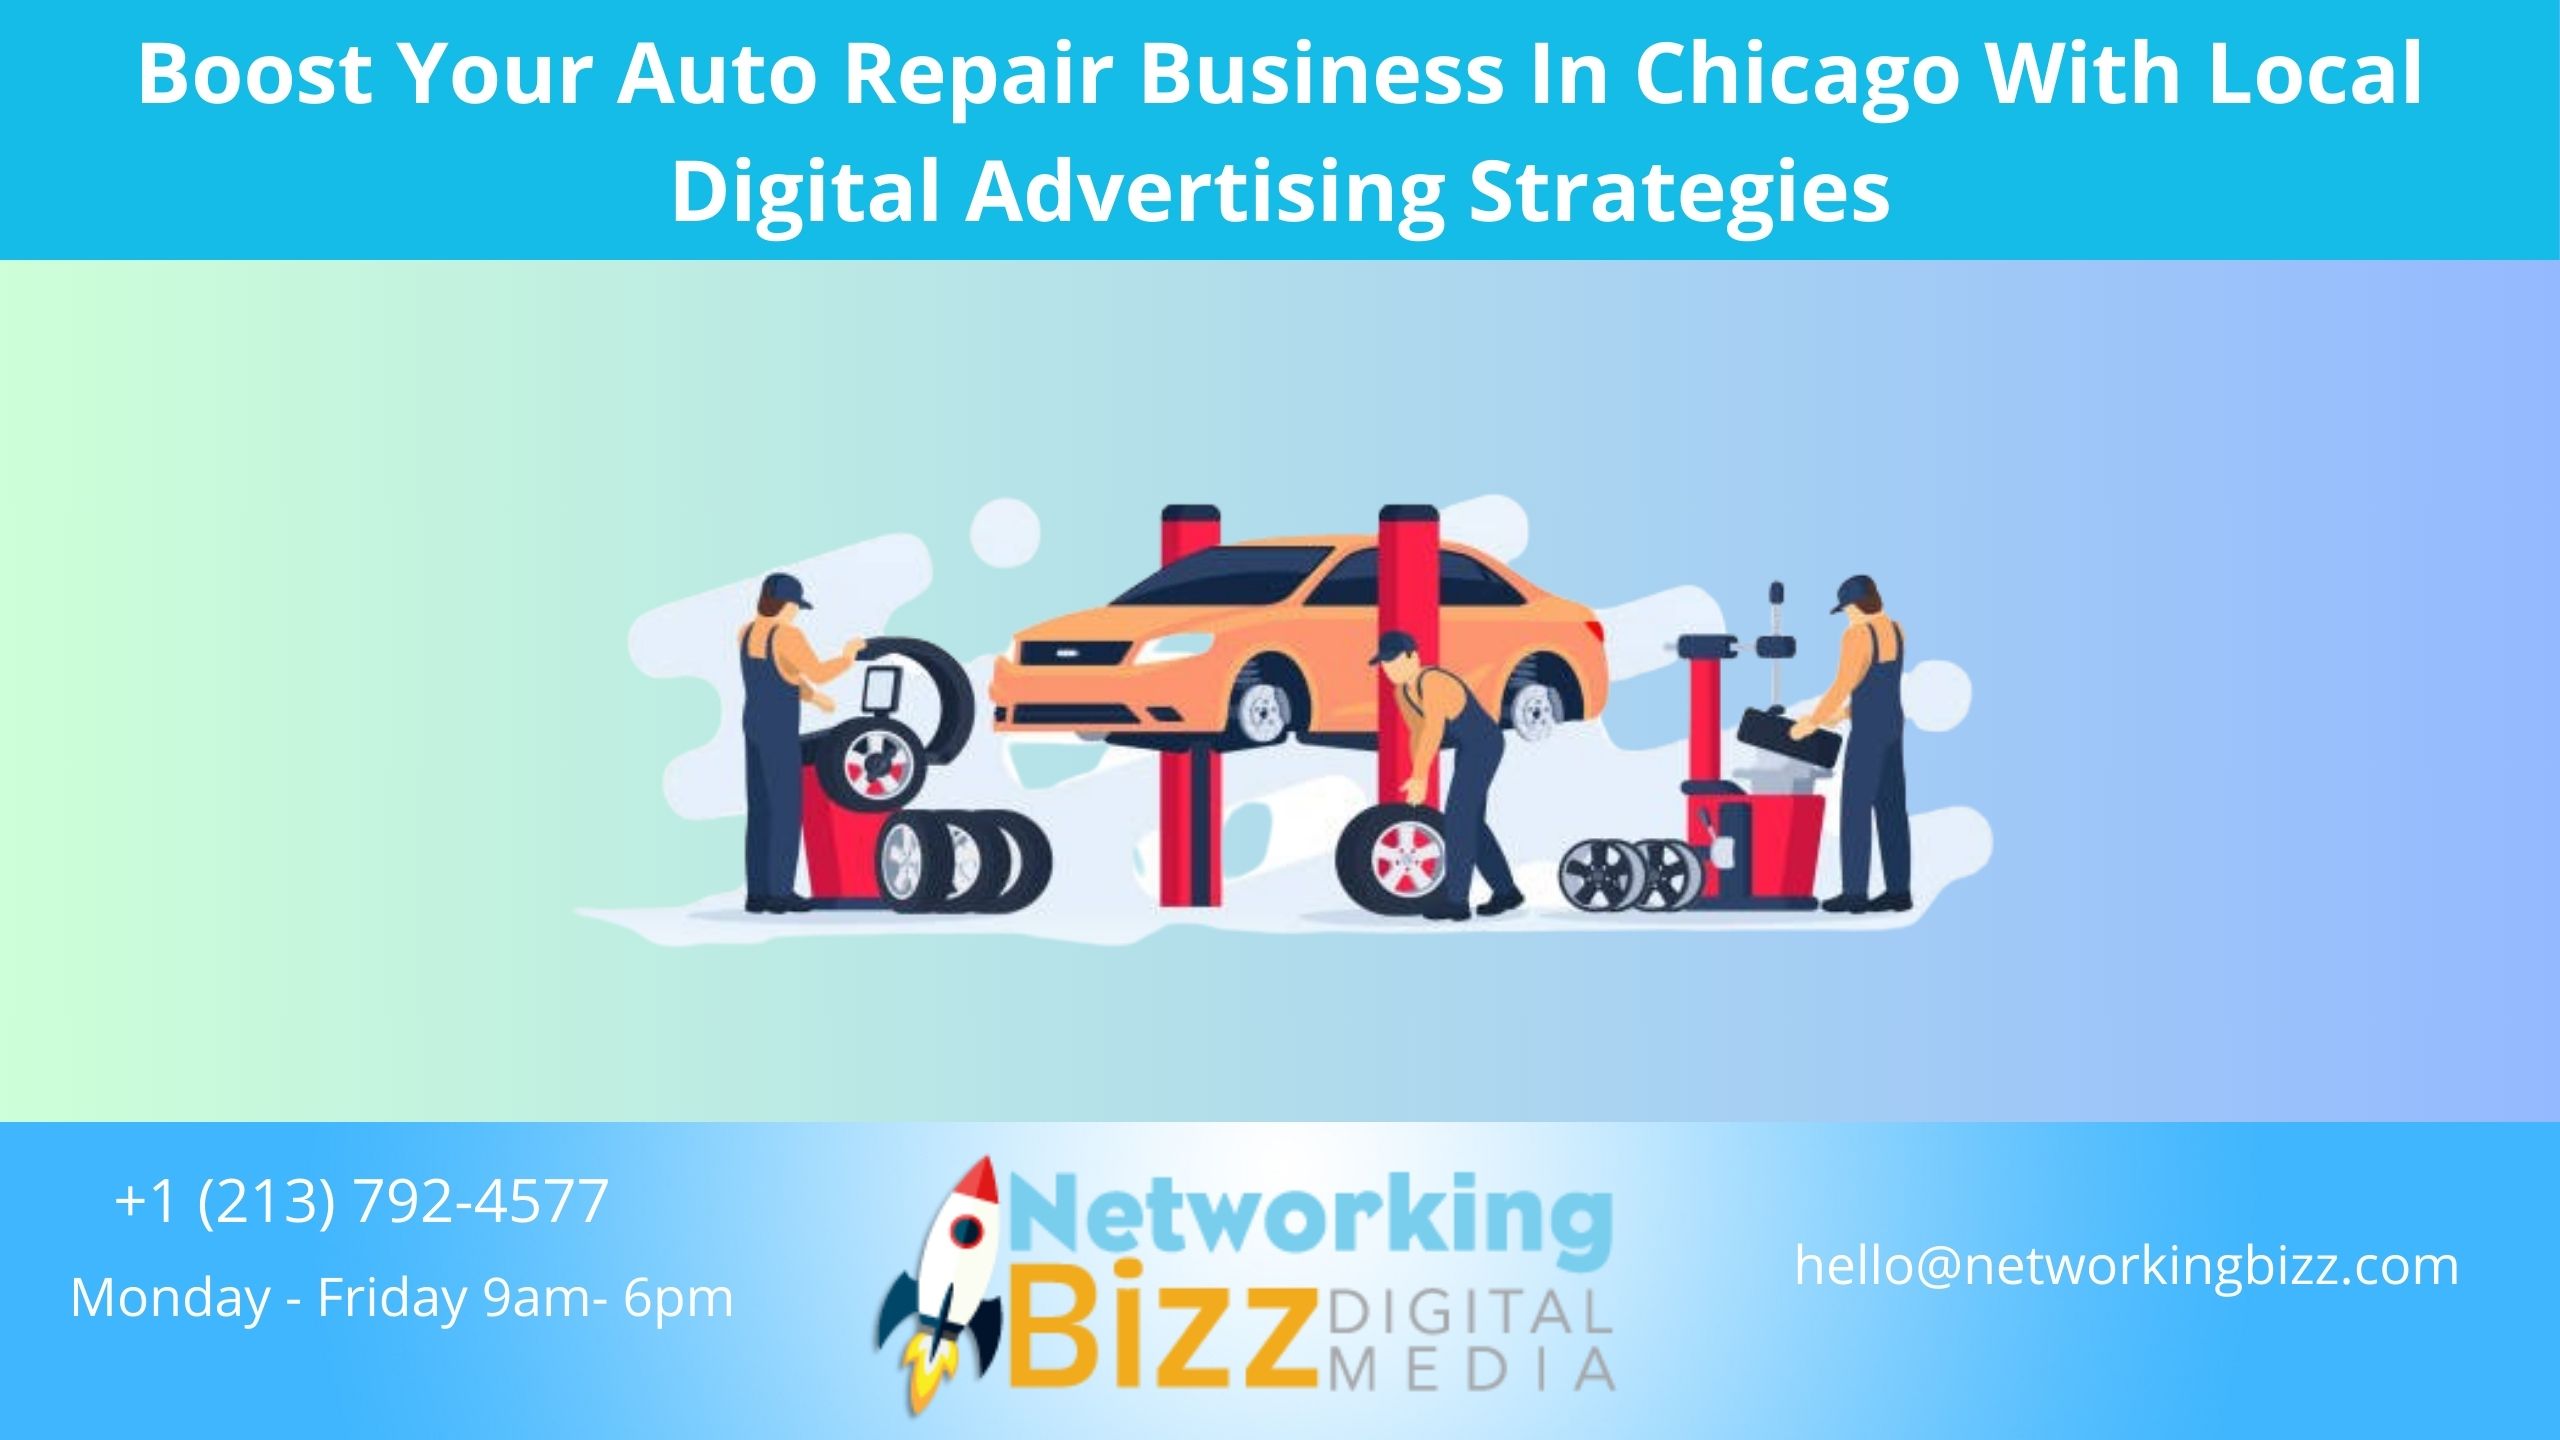 Boost Your Auto Repair Business In Chicago With Local Digital Advertising Strategies